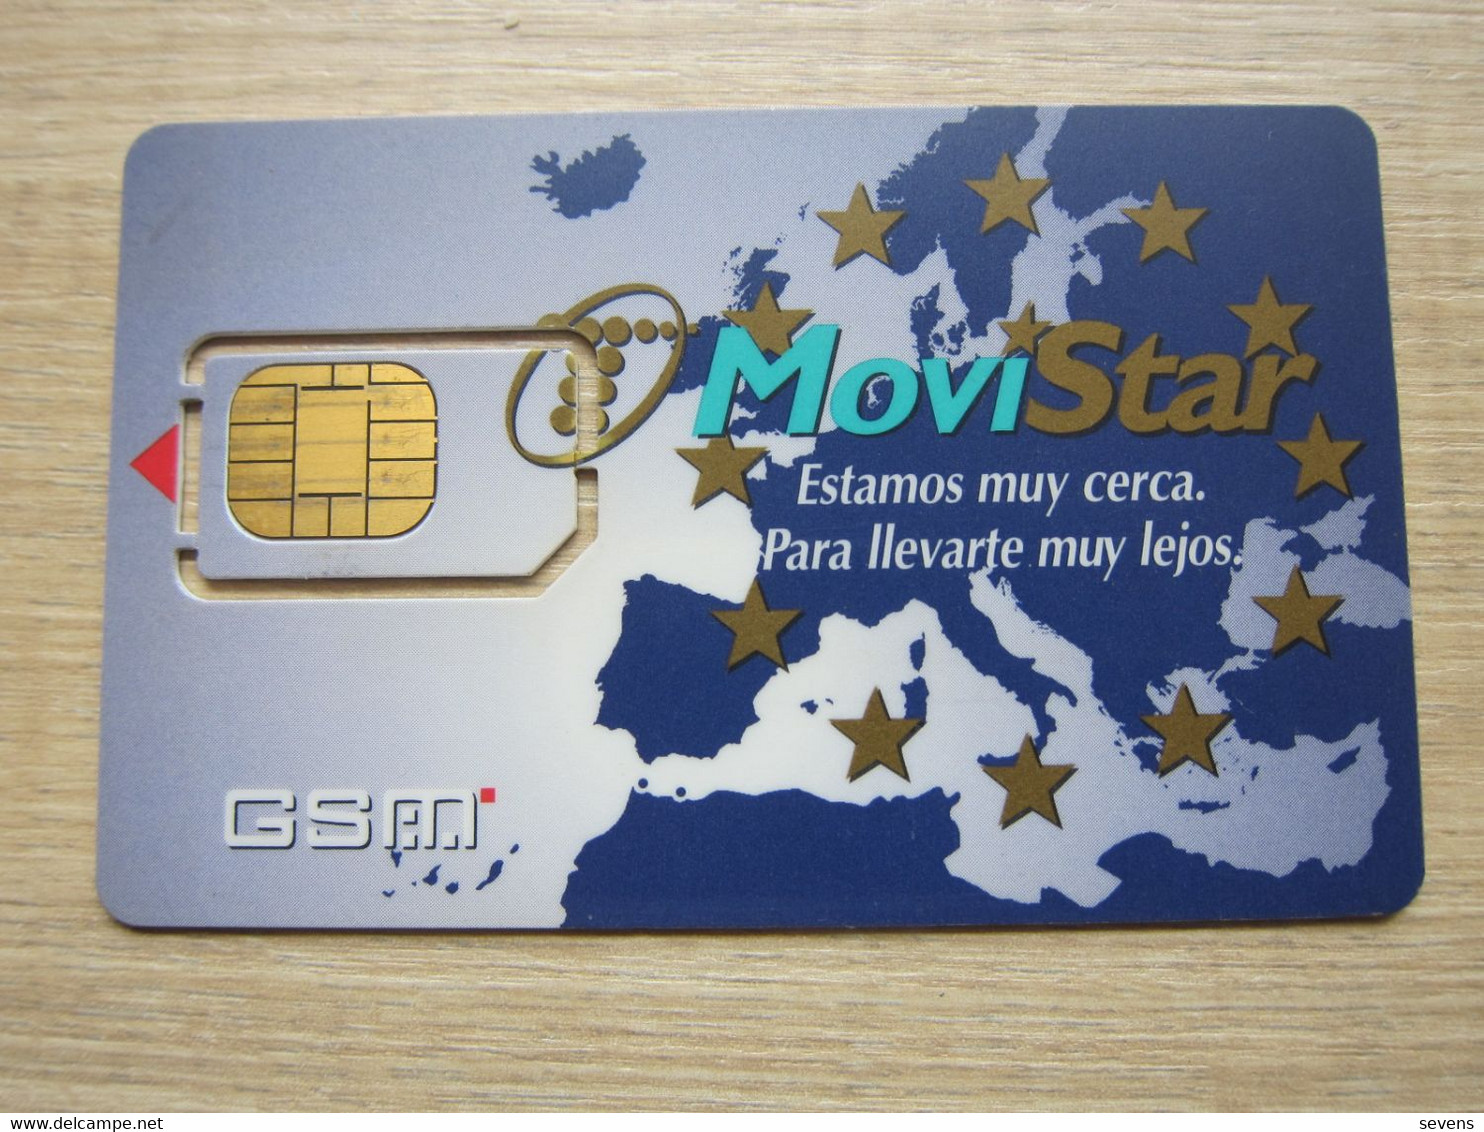 MoviStar Map Of West Europe,fixed Chip,different Frame(backside With Philips And Moreno Double Logos) - Telefonica